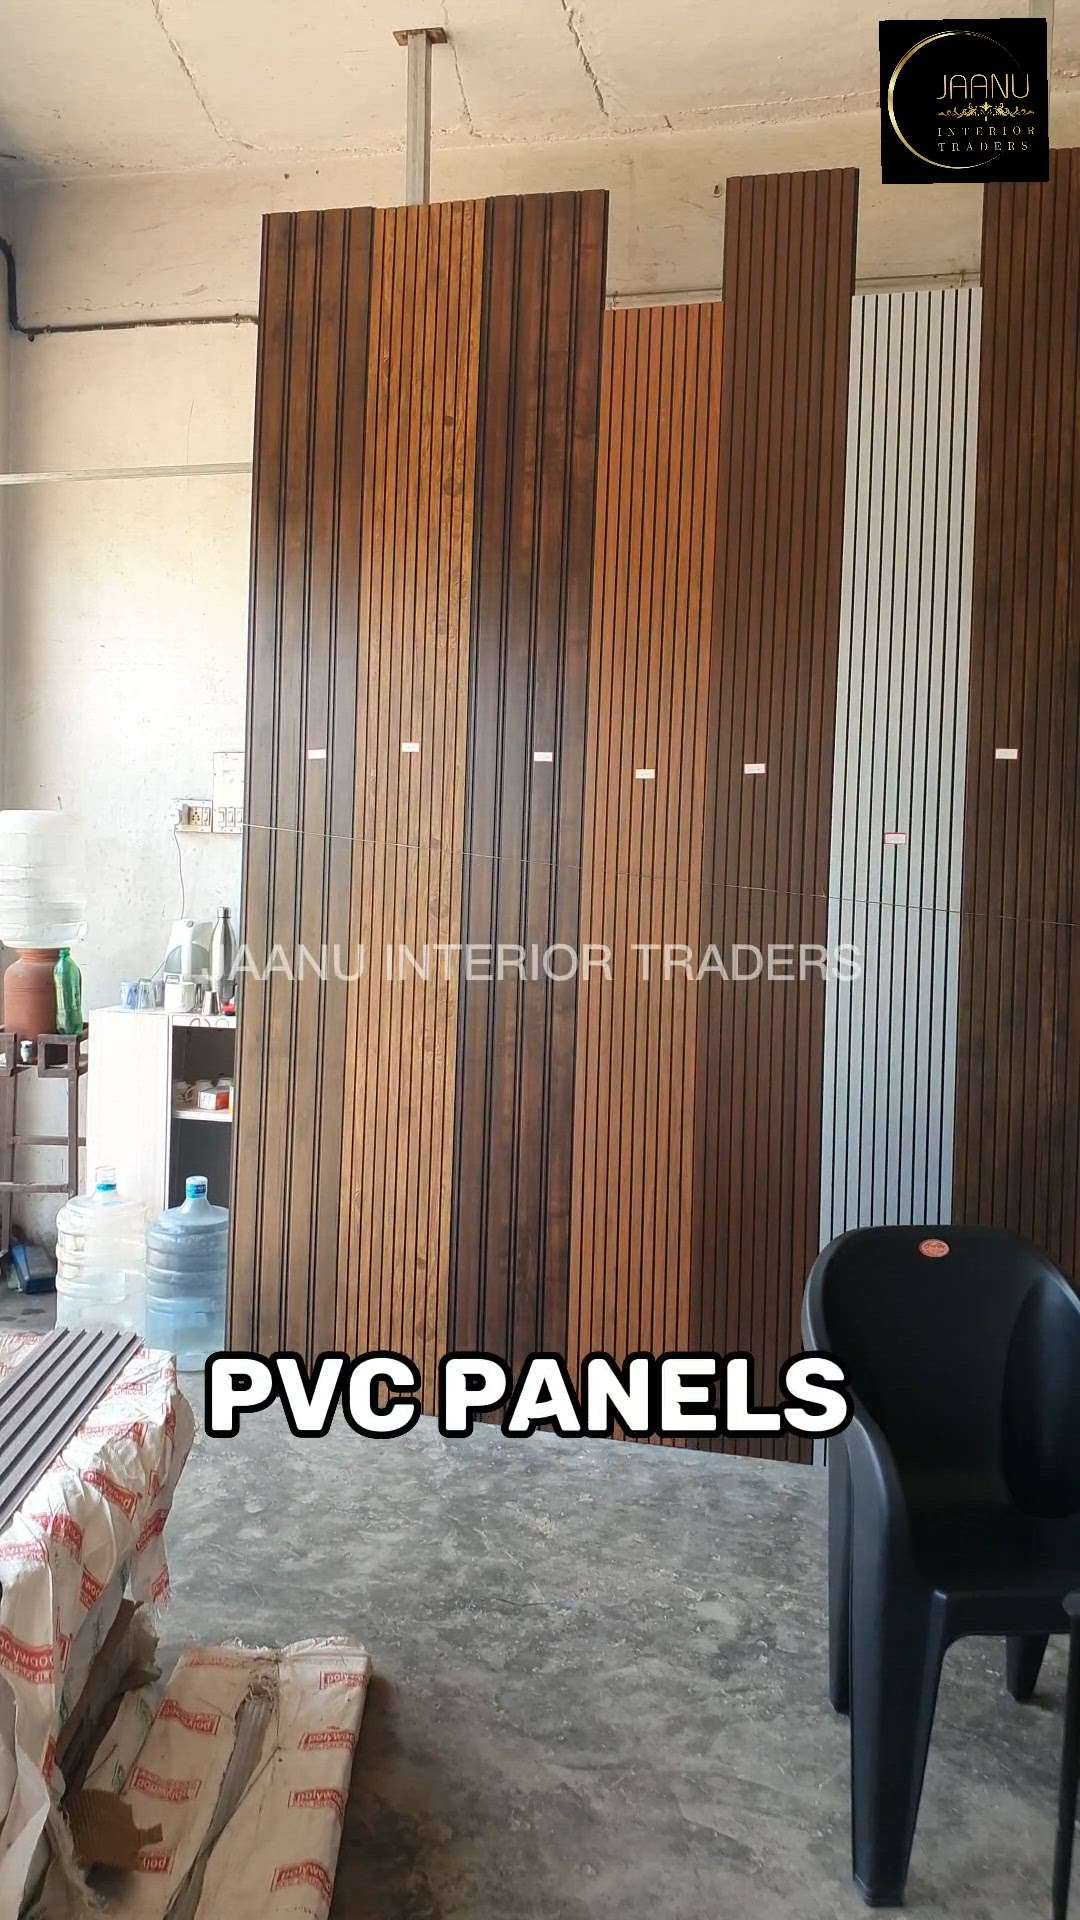 Pvc Panels For Interior & Exterior
Book your Order Today
For more details : 7736087180
https://wa.me/message/RSMX4NFWWNQMB1

#interiordesigner #interior #interiordecorating #interiorskerala  #InteriorDesigner